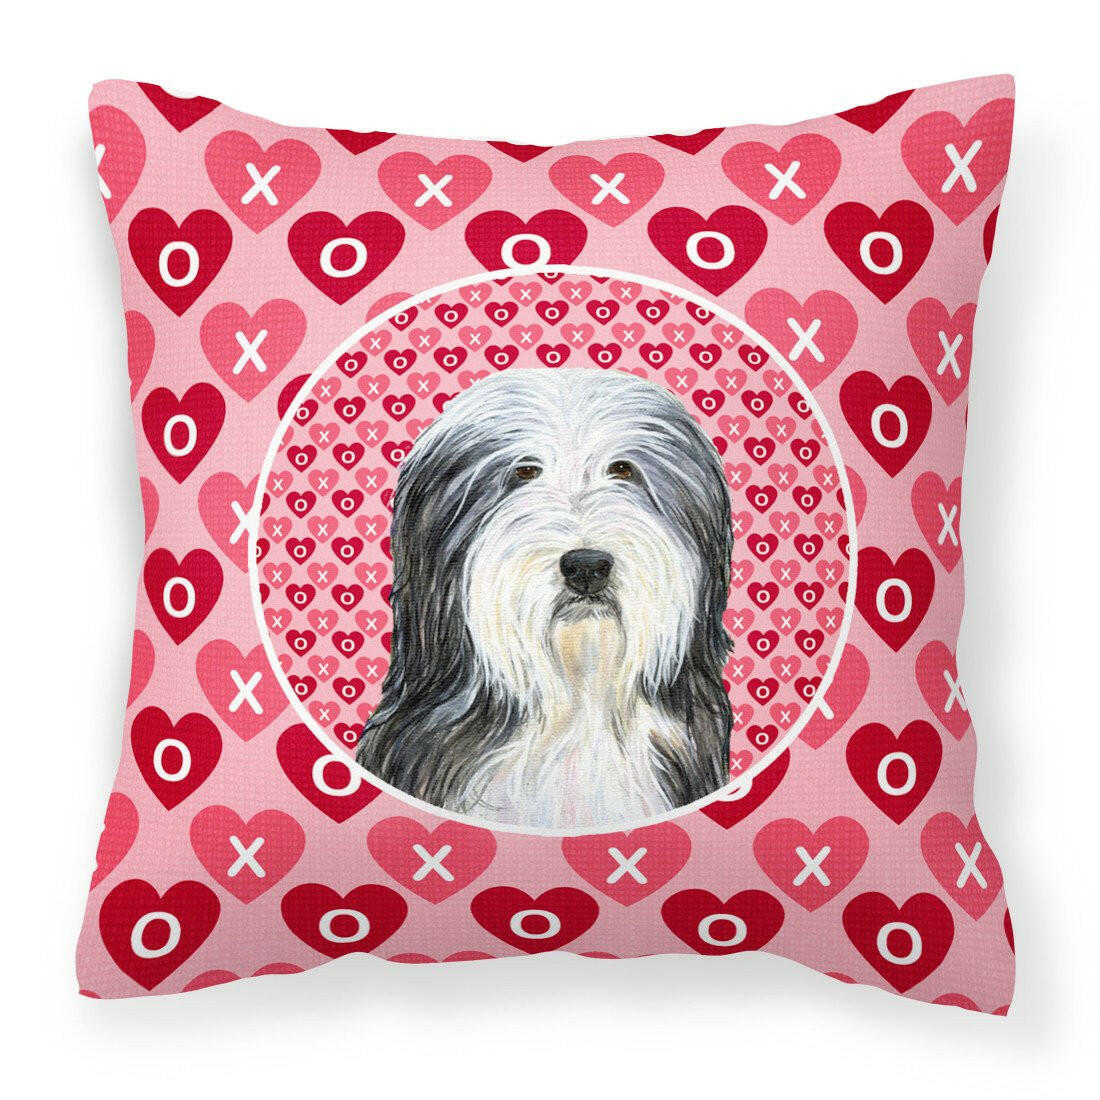 Bearded Collie Hearts Love and Valentine's Day Portrait Fabric Decorative Pillow SS4497PW1414 by Caroline's Treasures